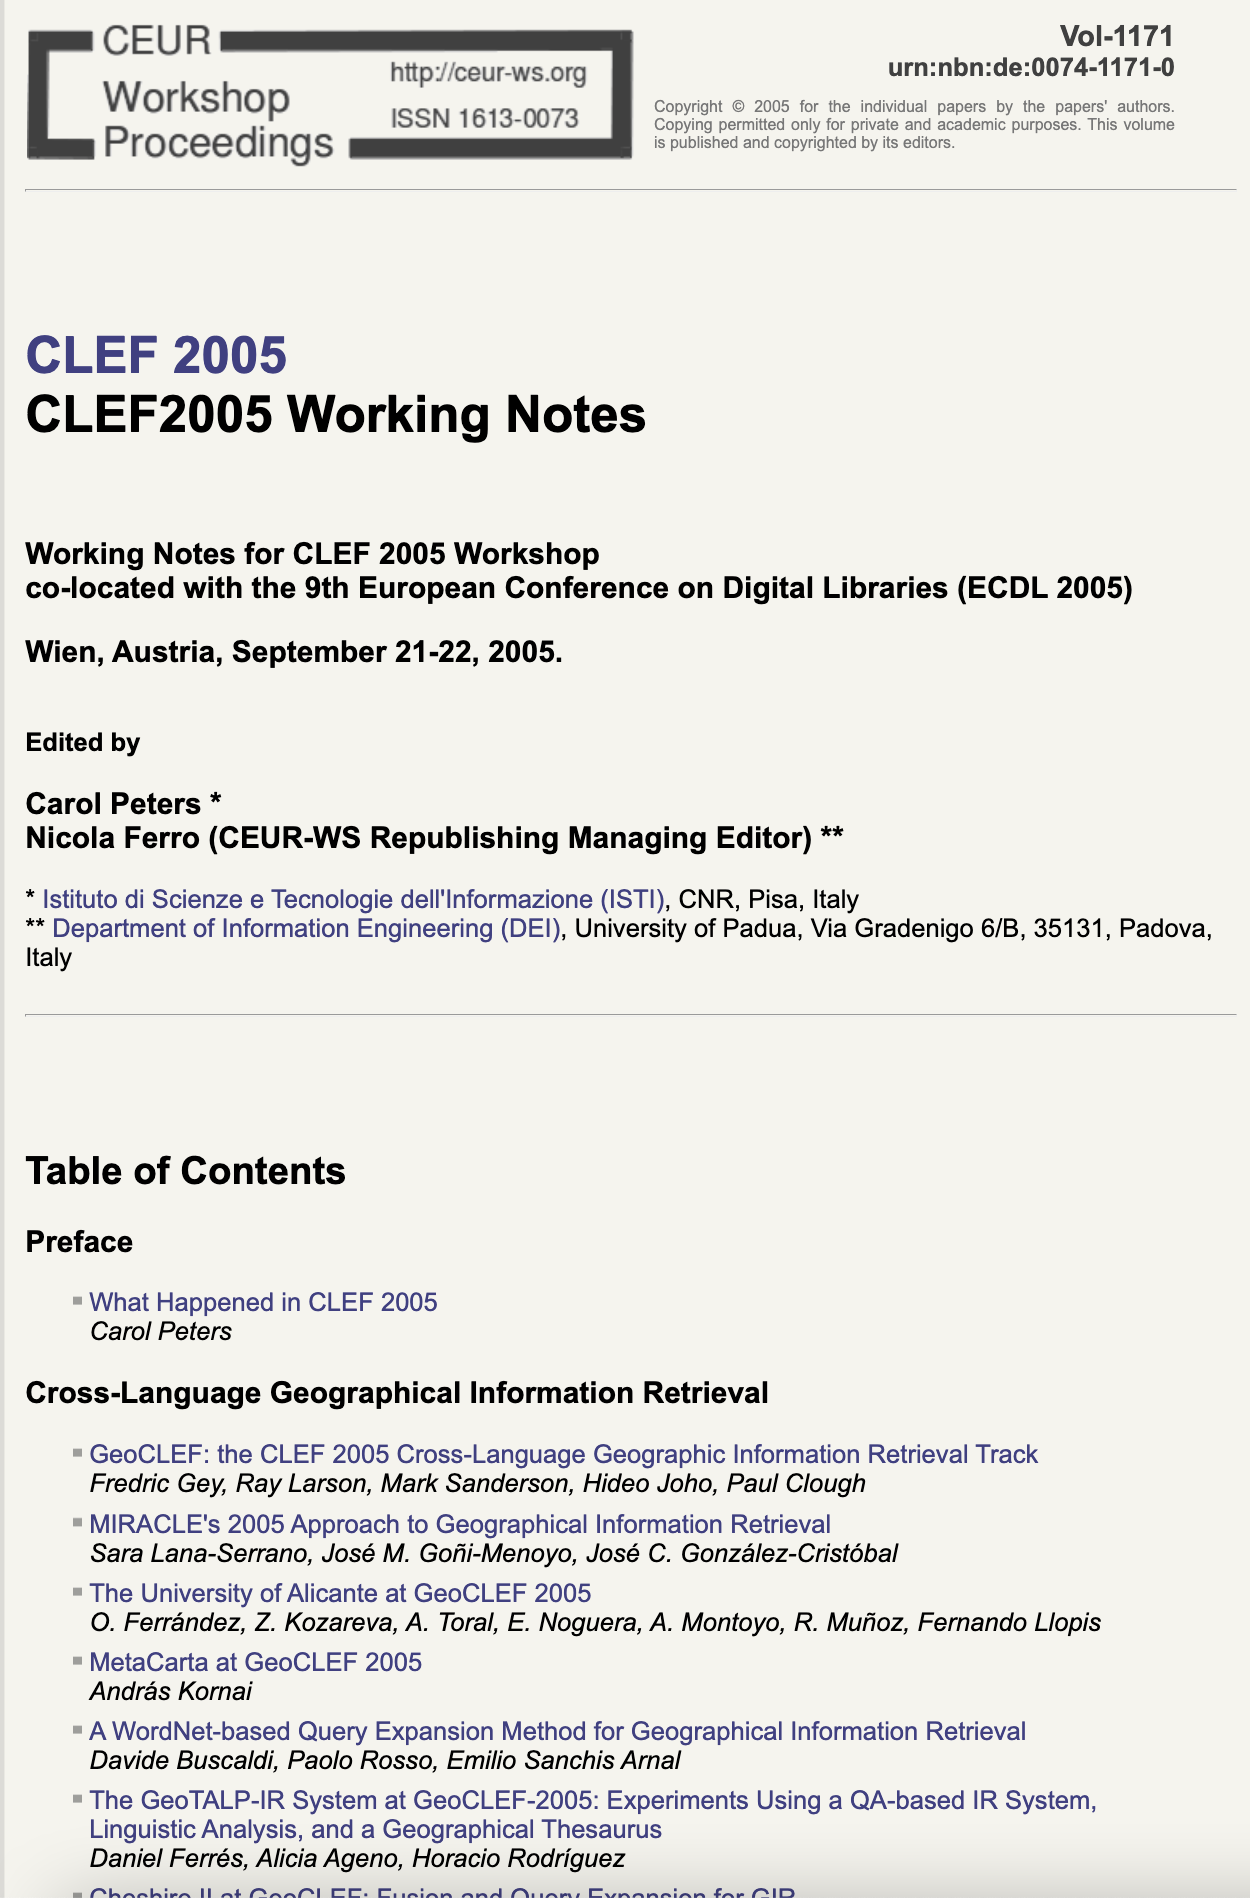 CLEF 2005 CEUR-WS Working Notes page